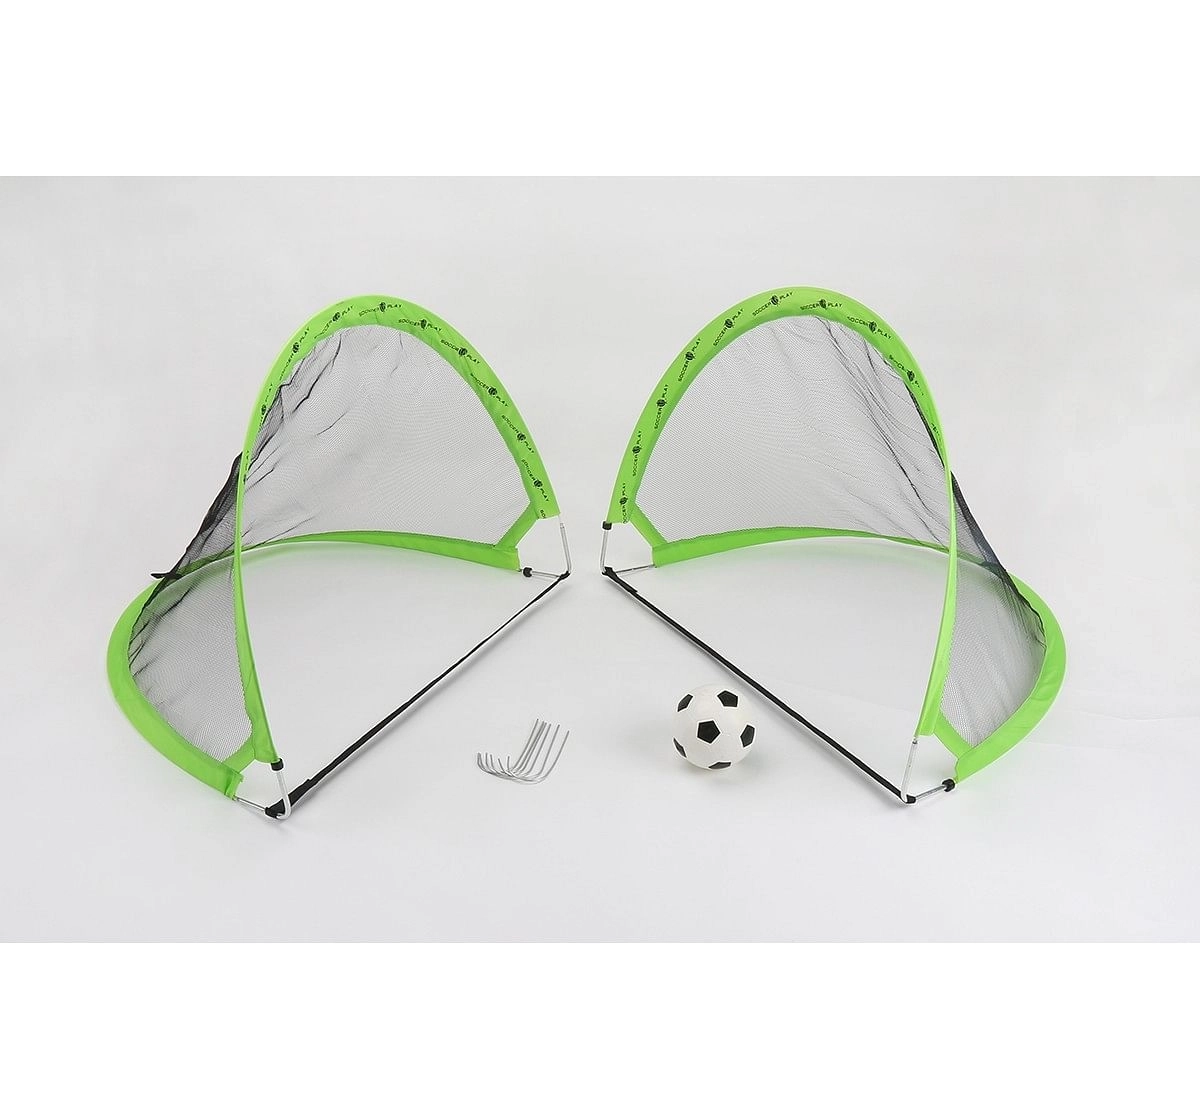 Dihua Football Goal Set for Kids age 3Y+ 